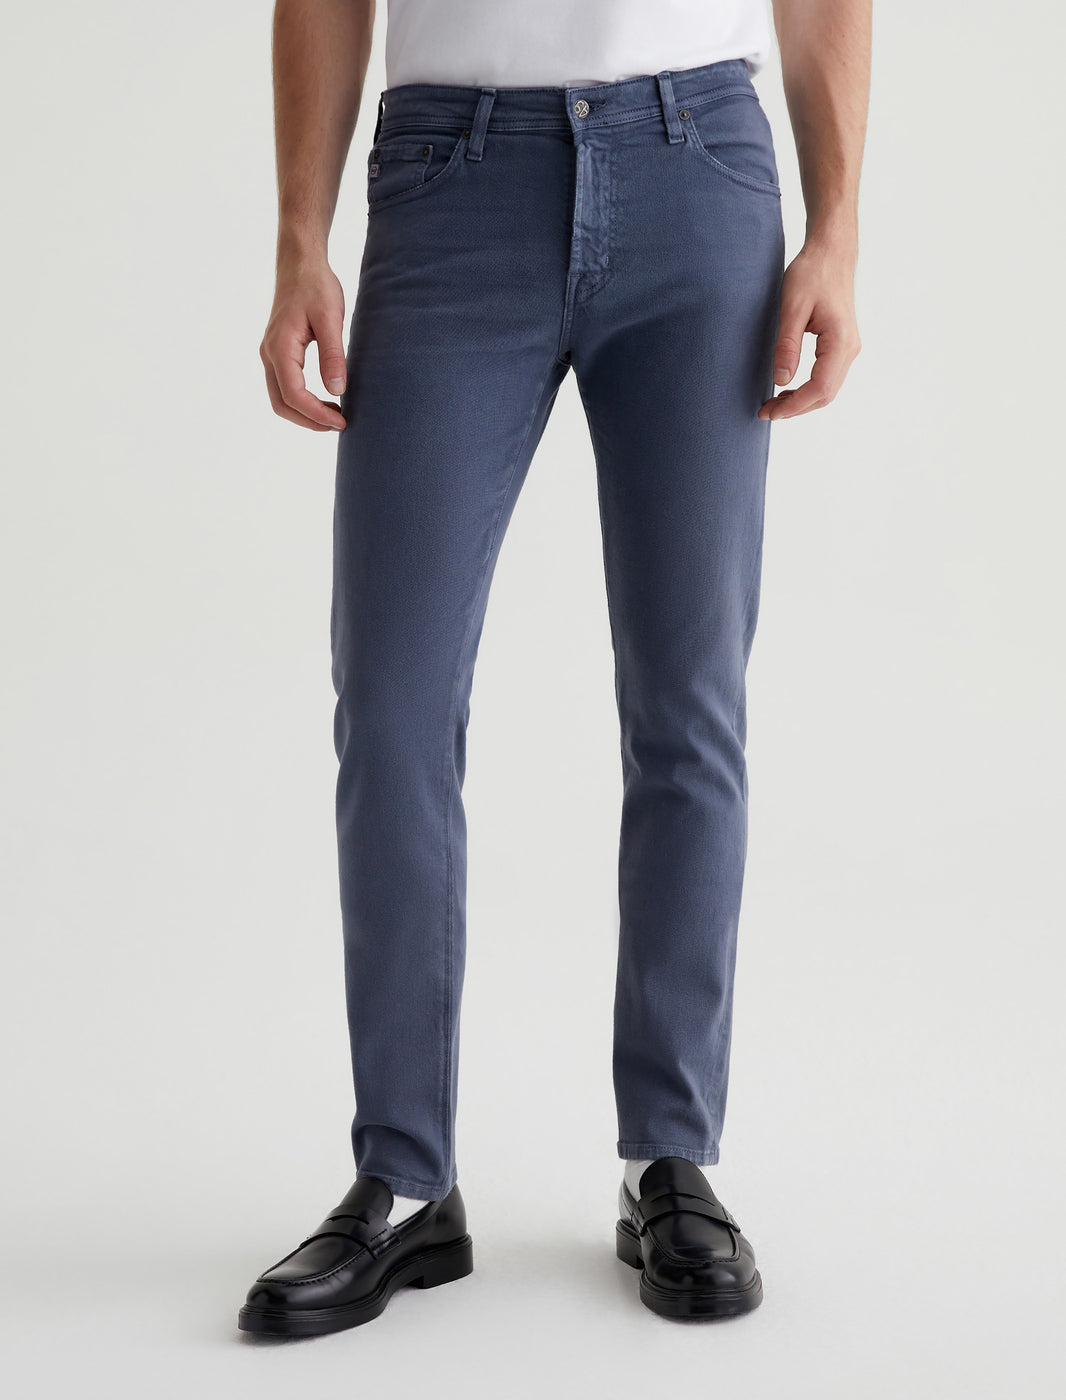 Ellington Mens Tellis 2 at AG Years Jeans Store Official